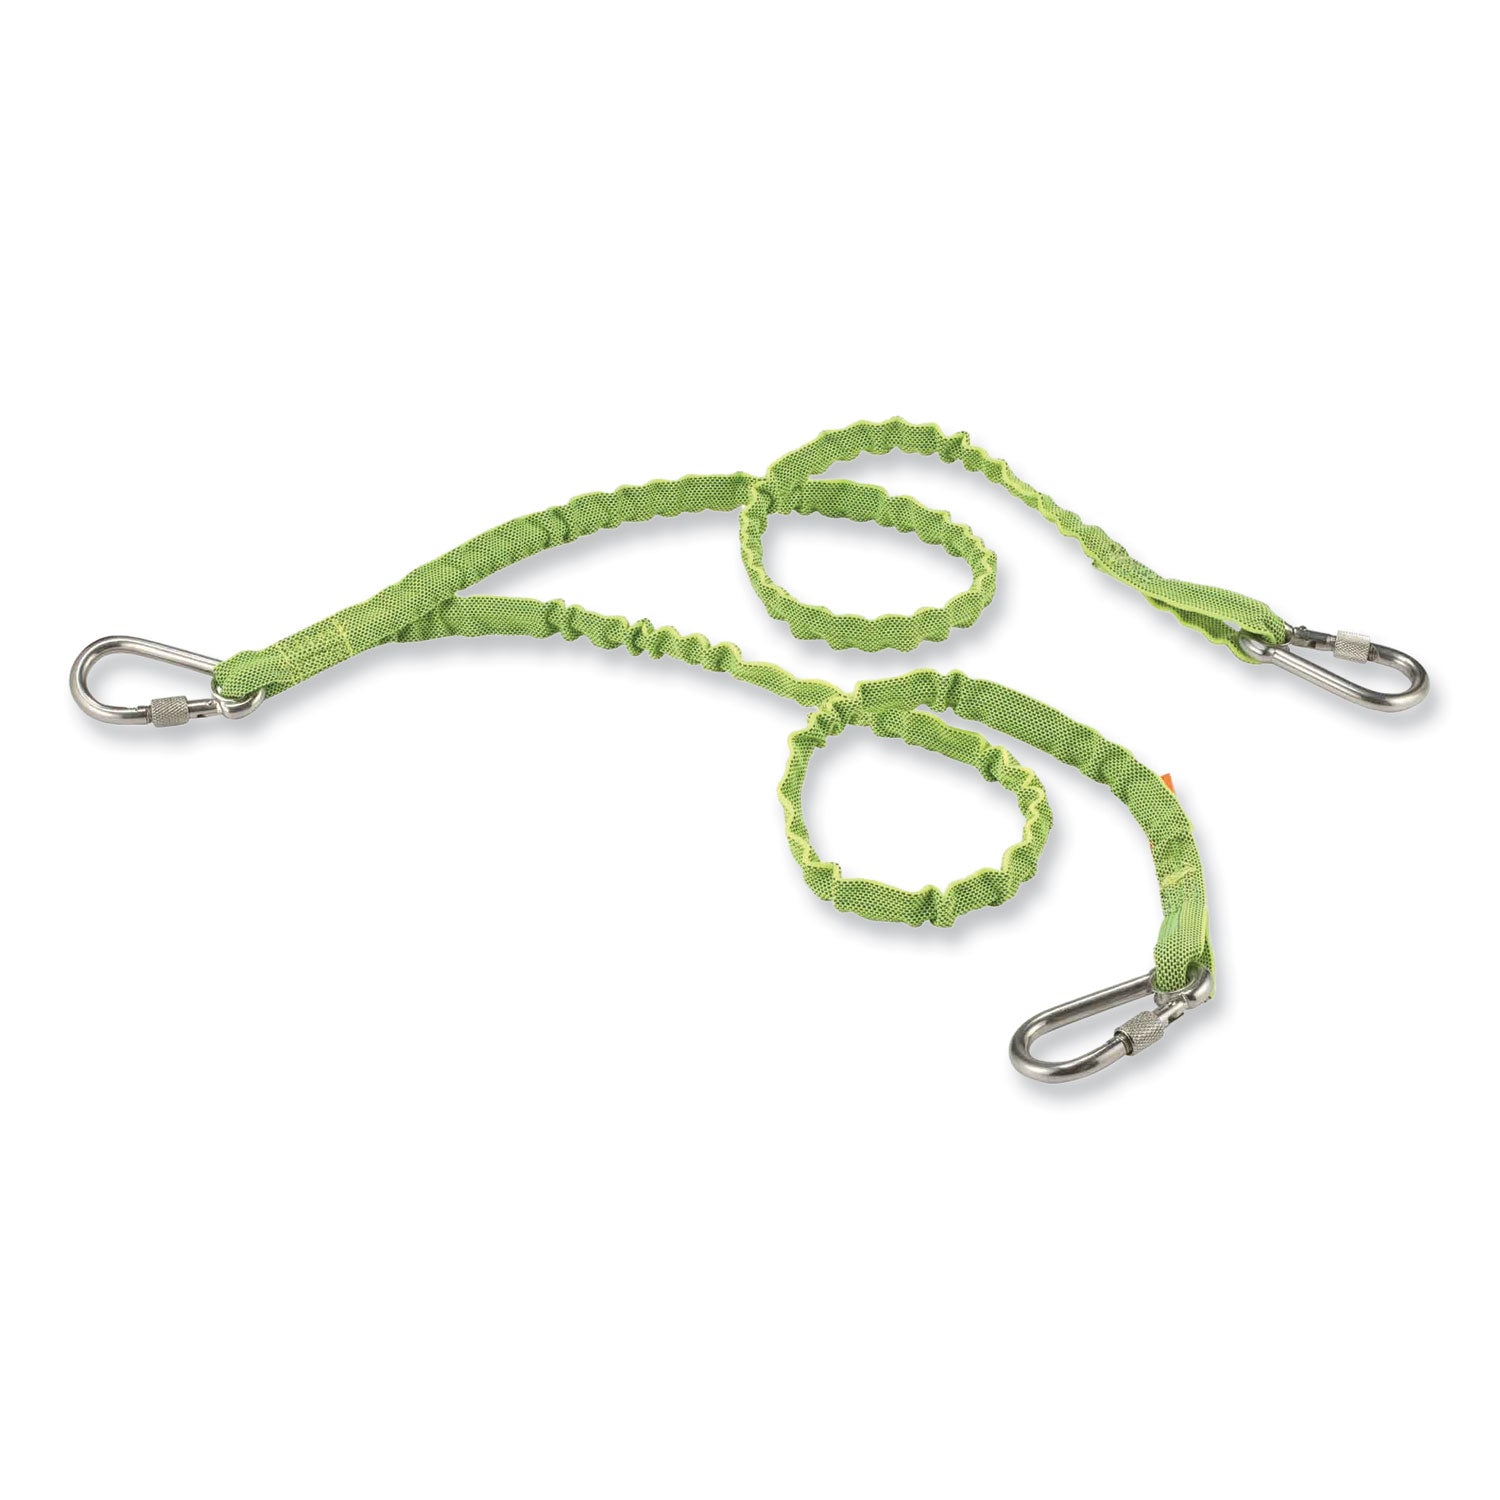 squids-3311-twin-leg-tool-lanyard-with-three-carabiners-15lb-max-work-capacity-35-to-42-lime-ships-in-1-3-business-days_ego19083 - 1